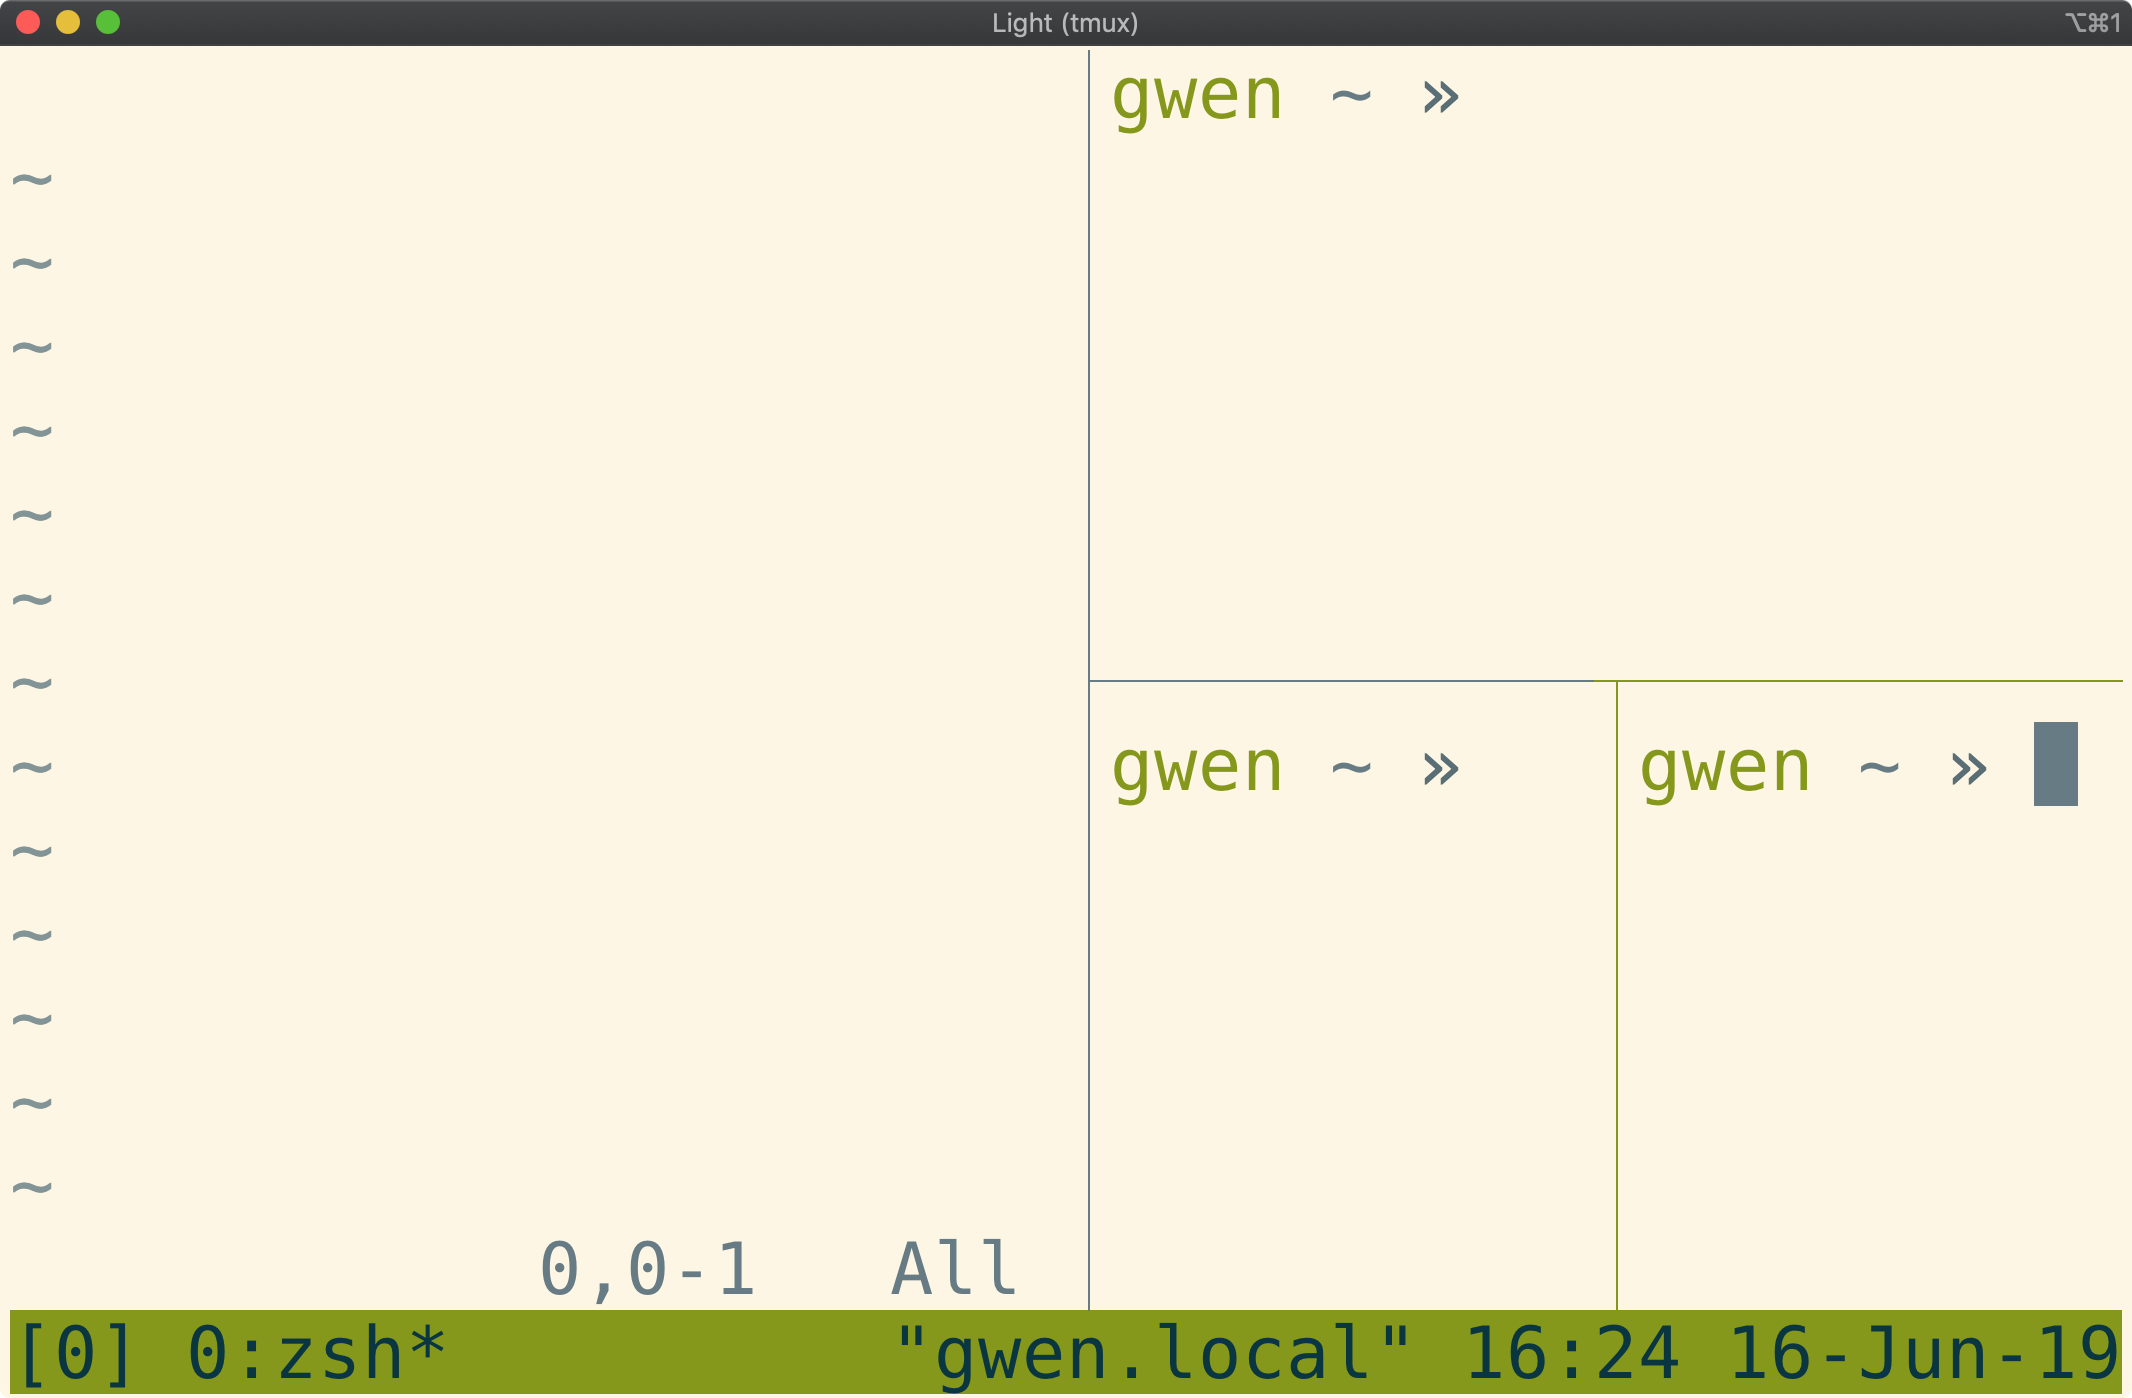 Tmux window split vertically, with the right pane split horizontally,
and then the right-bottom pane split vertically